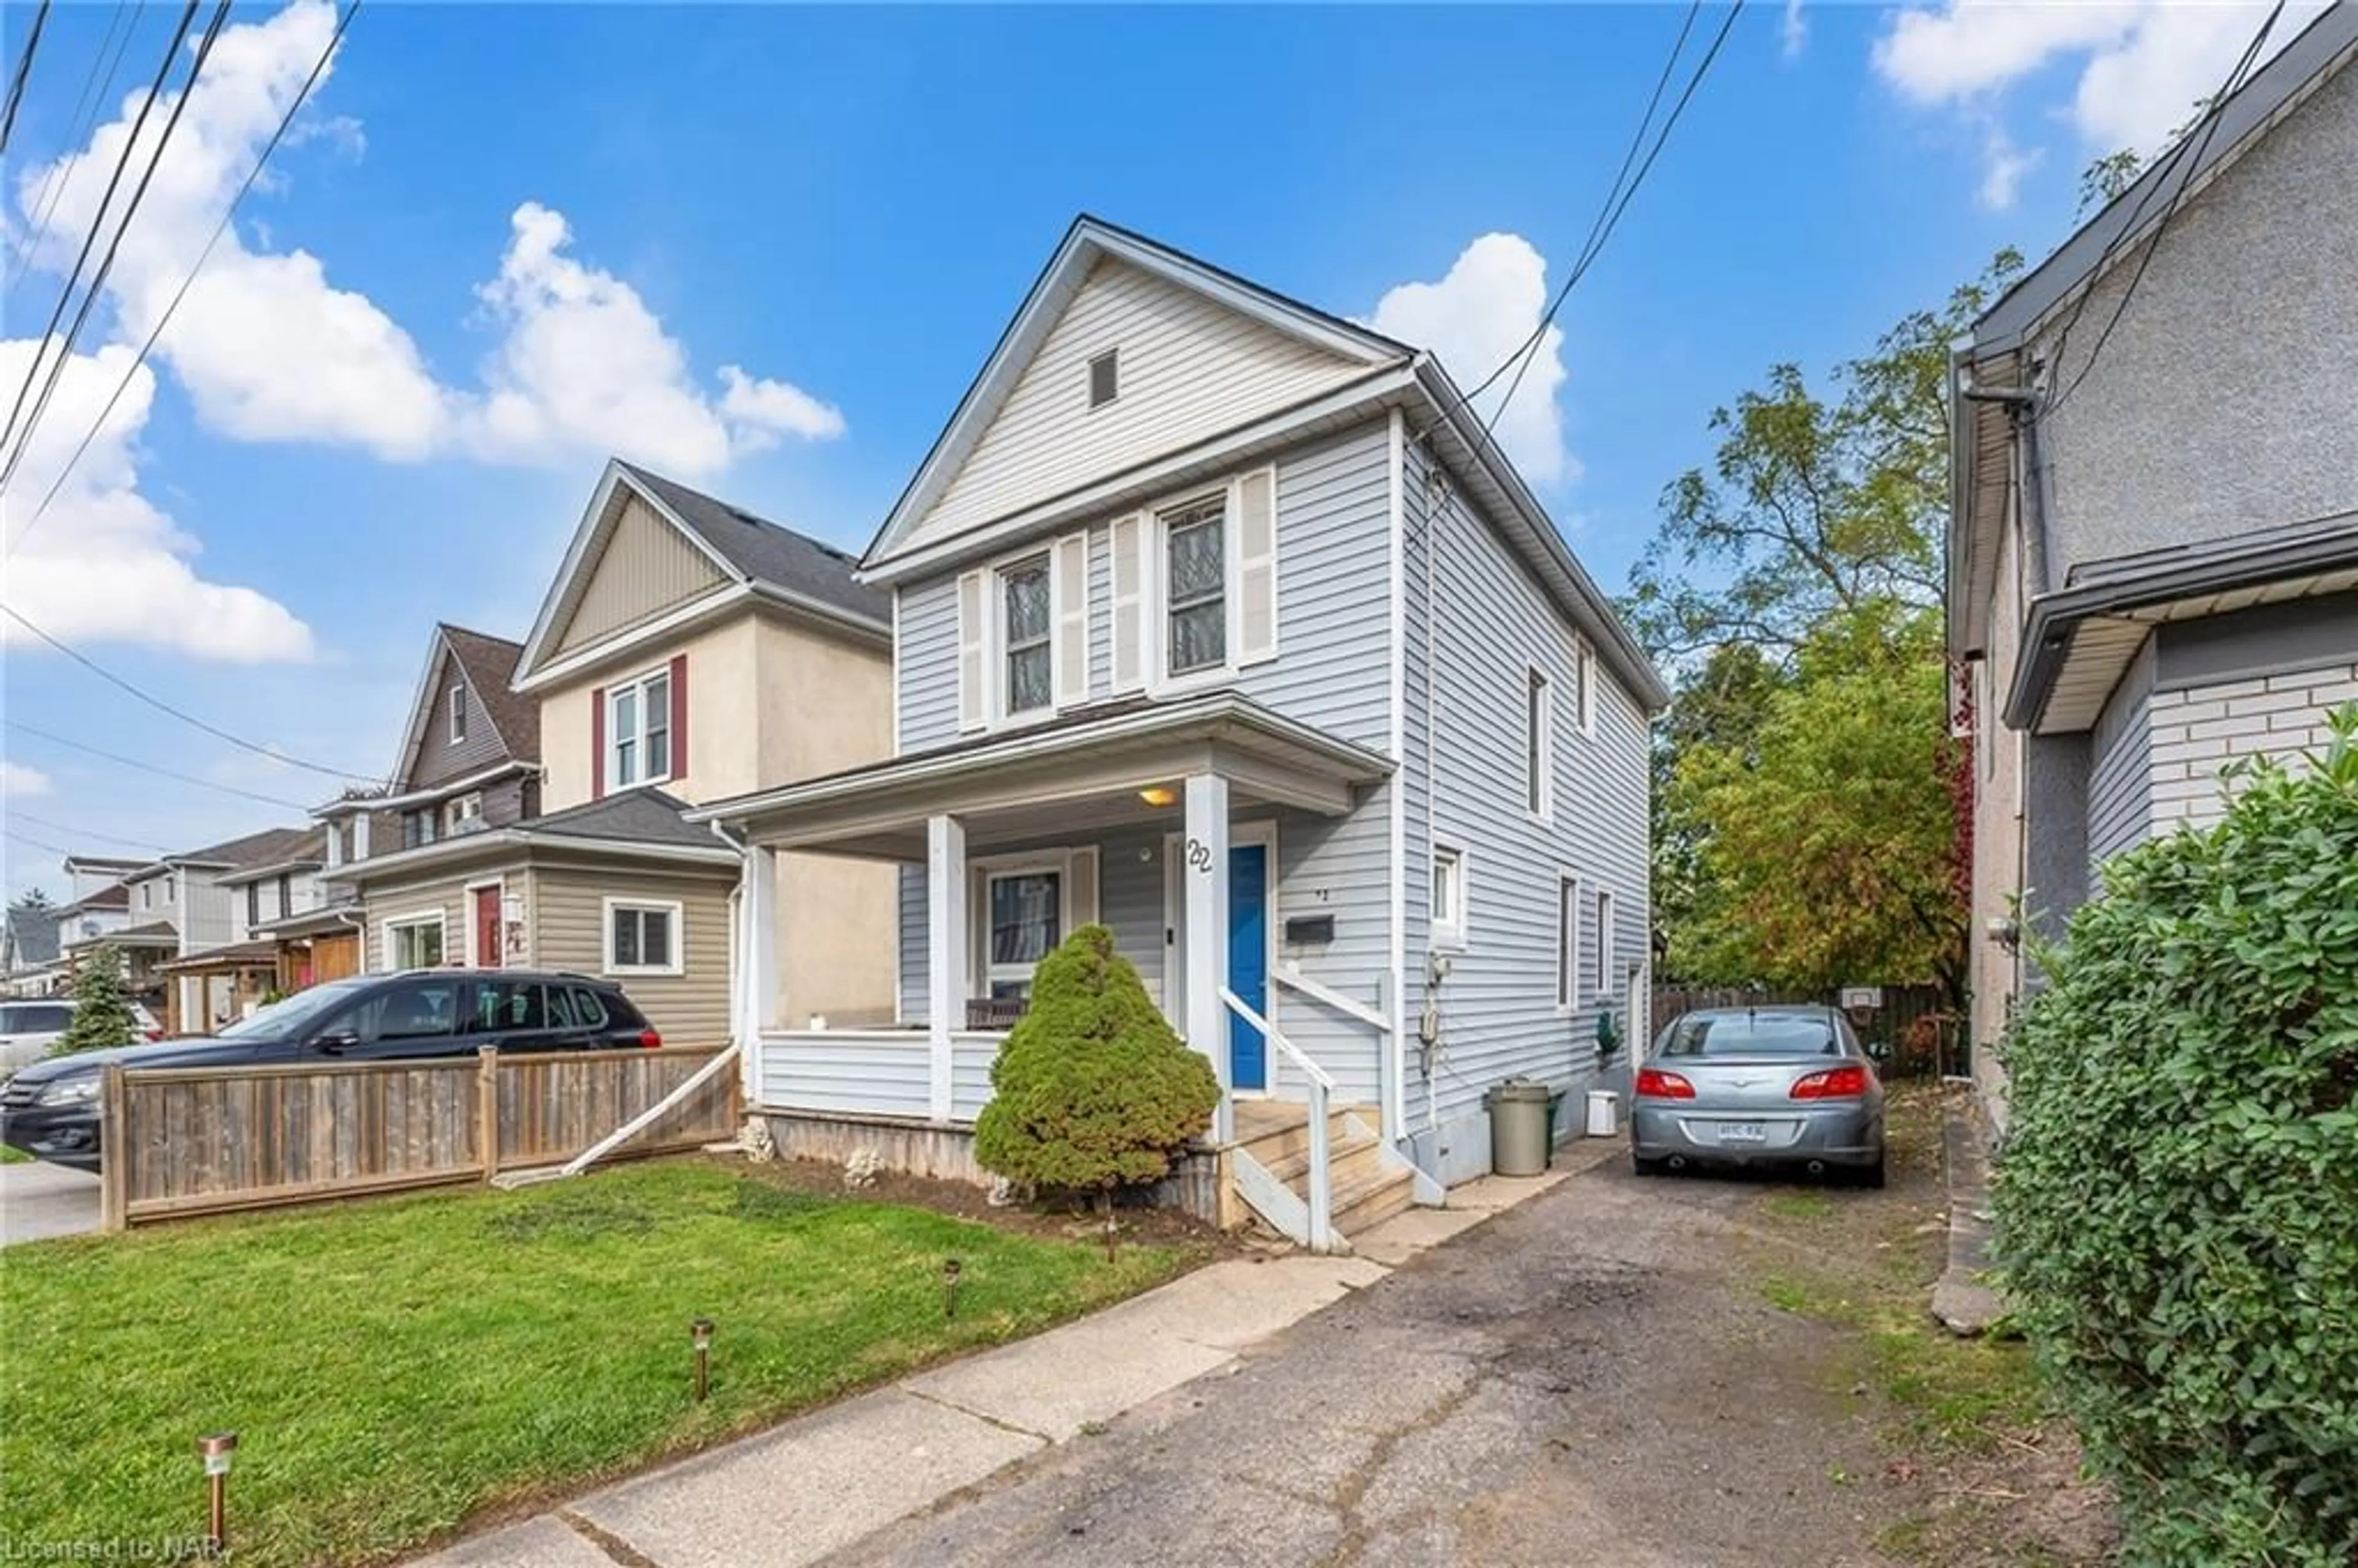 Frontside or backside of a home for 22 Denistoun St, Welland Ontario L3C 1T9